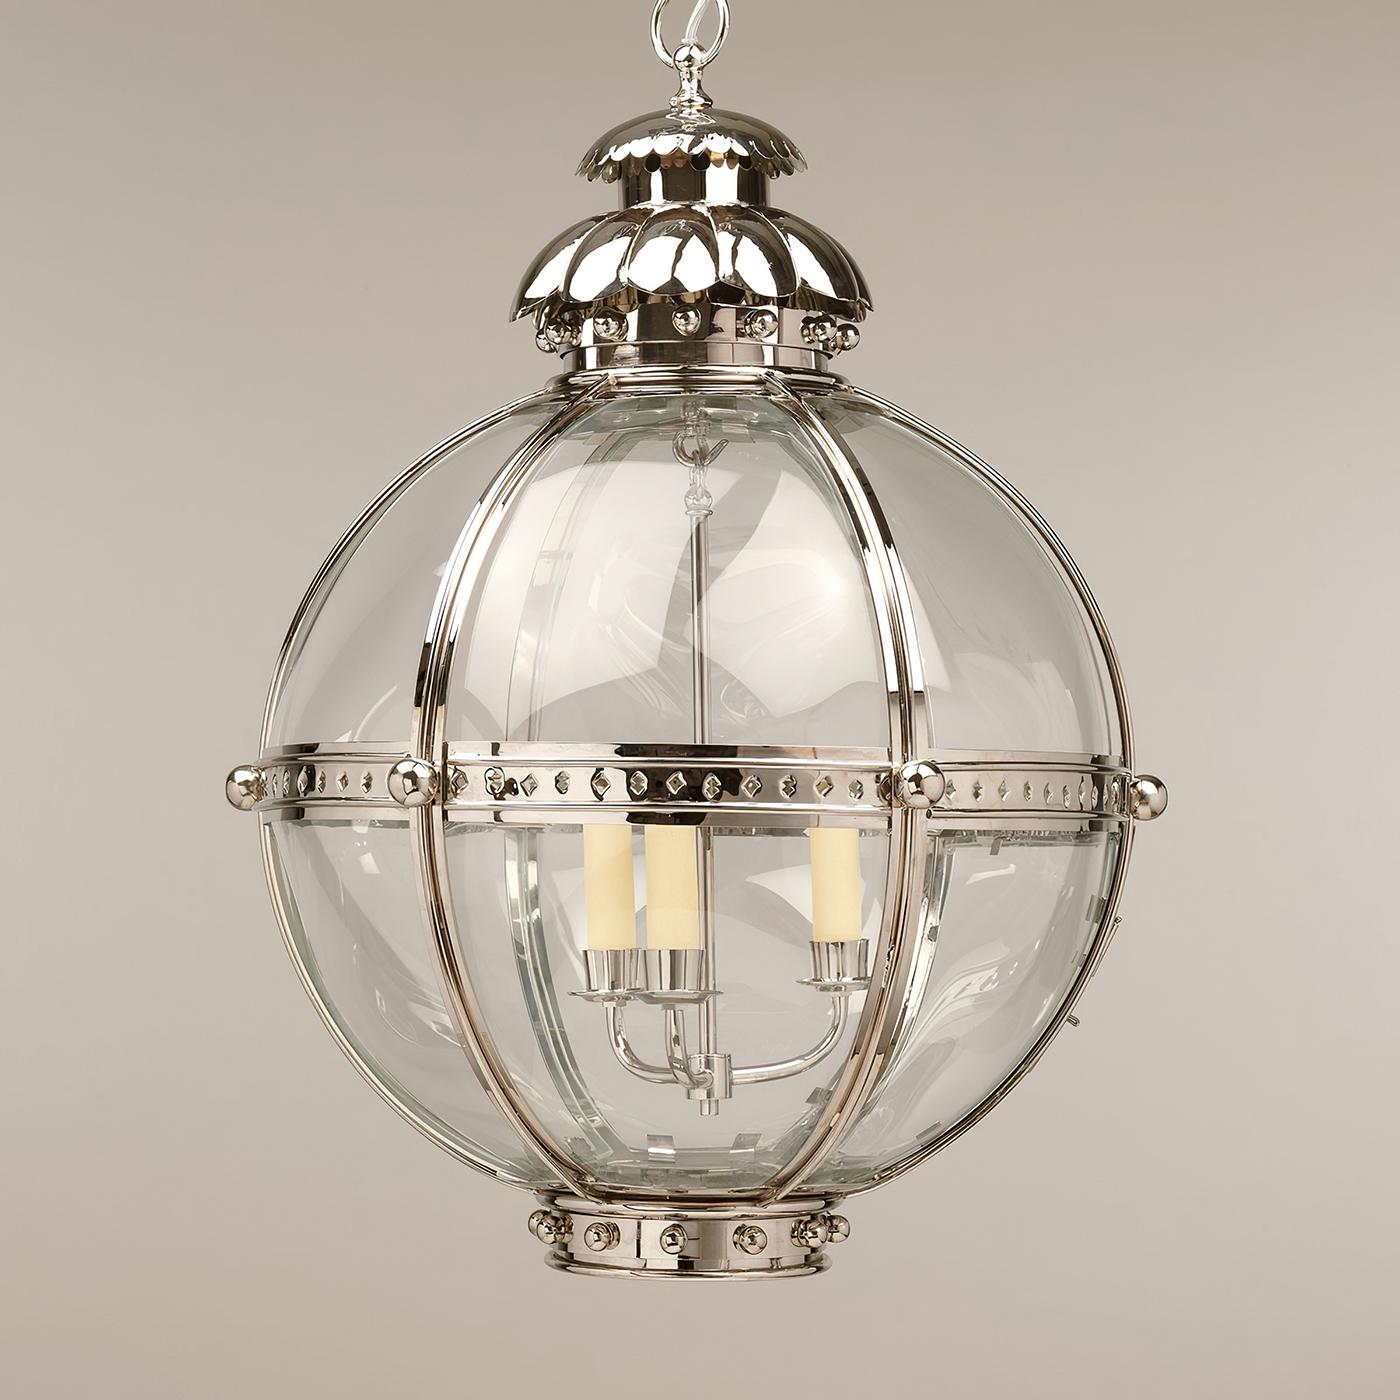 The Globe Lantern is based on a similar 19th-century antique. The globe shape of the fixture emanates strength and is united by the nickel finish finials and acanthus top.

The lantern is hand-fabricated from brass and curved glass panels. The